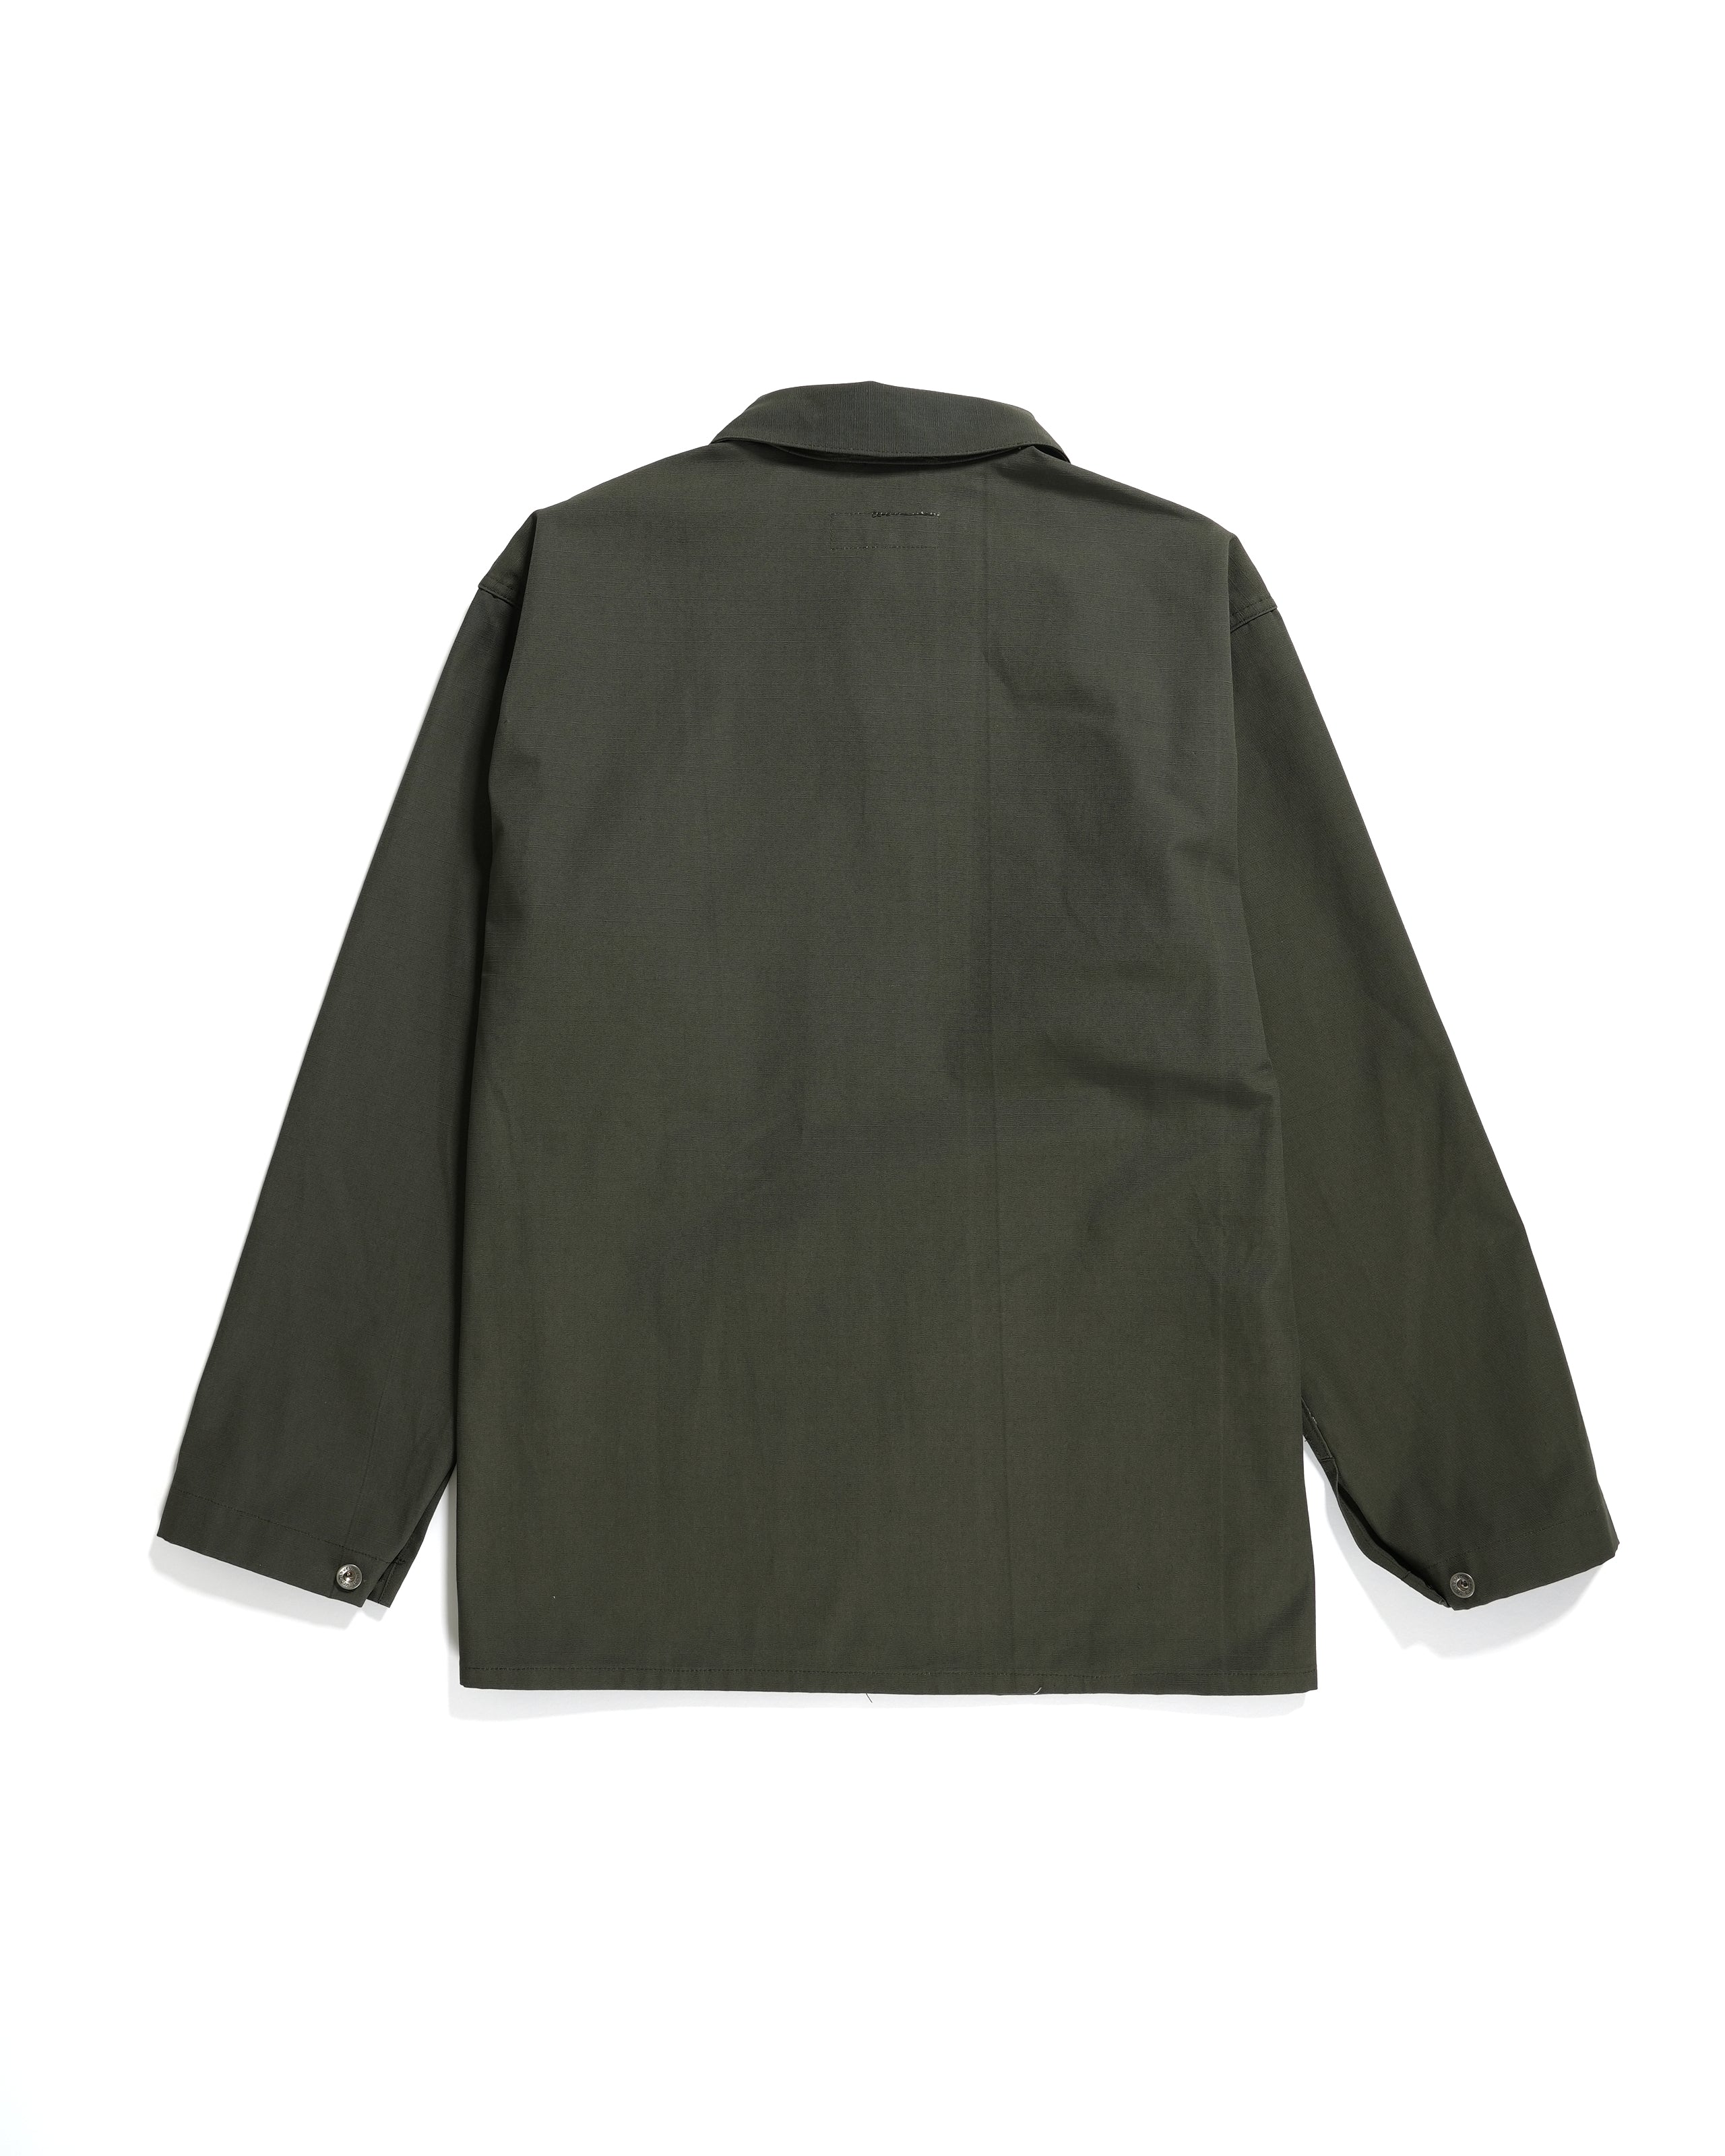 Utility Jacket - Olive Heavyweight Cotton Ripstop